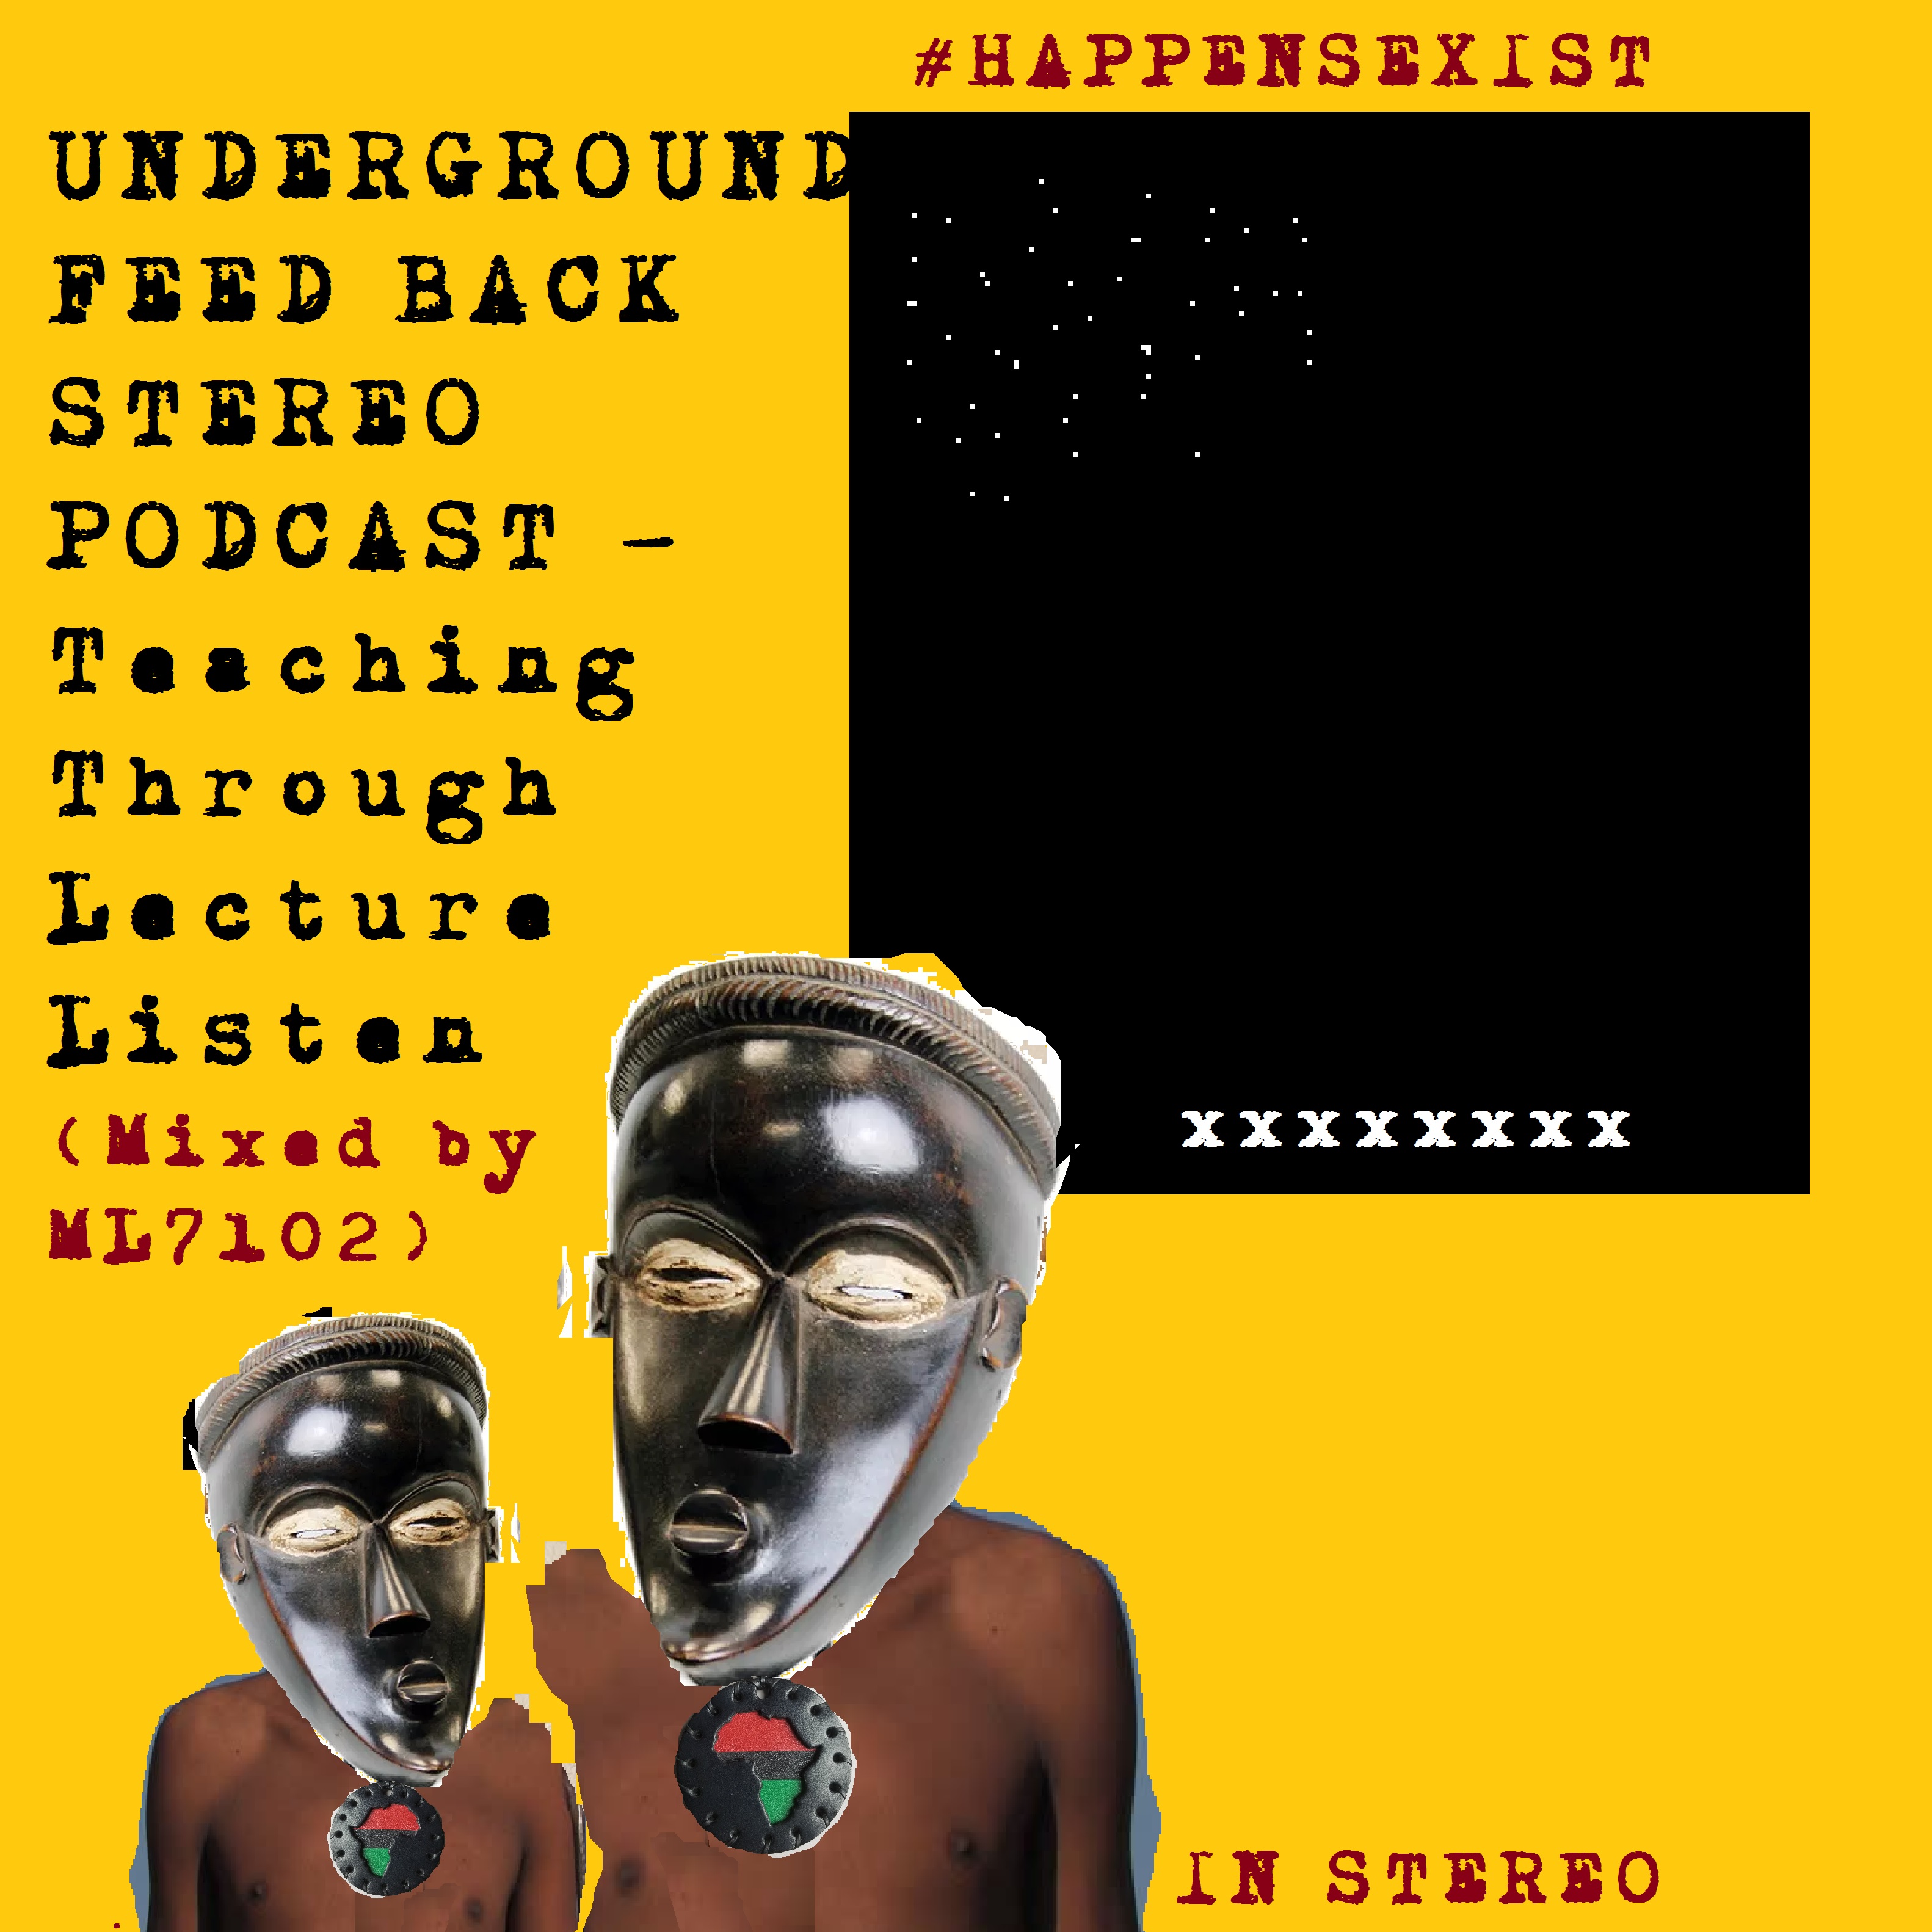 UNDERGROUND FEED BACK STEREO PODCAST - Teaching Through Lecture Listen (Mixed by ML7102)